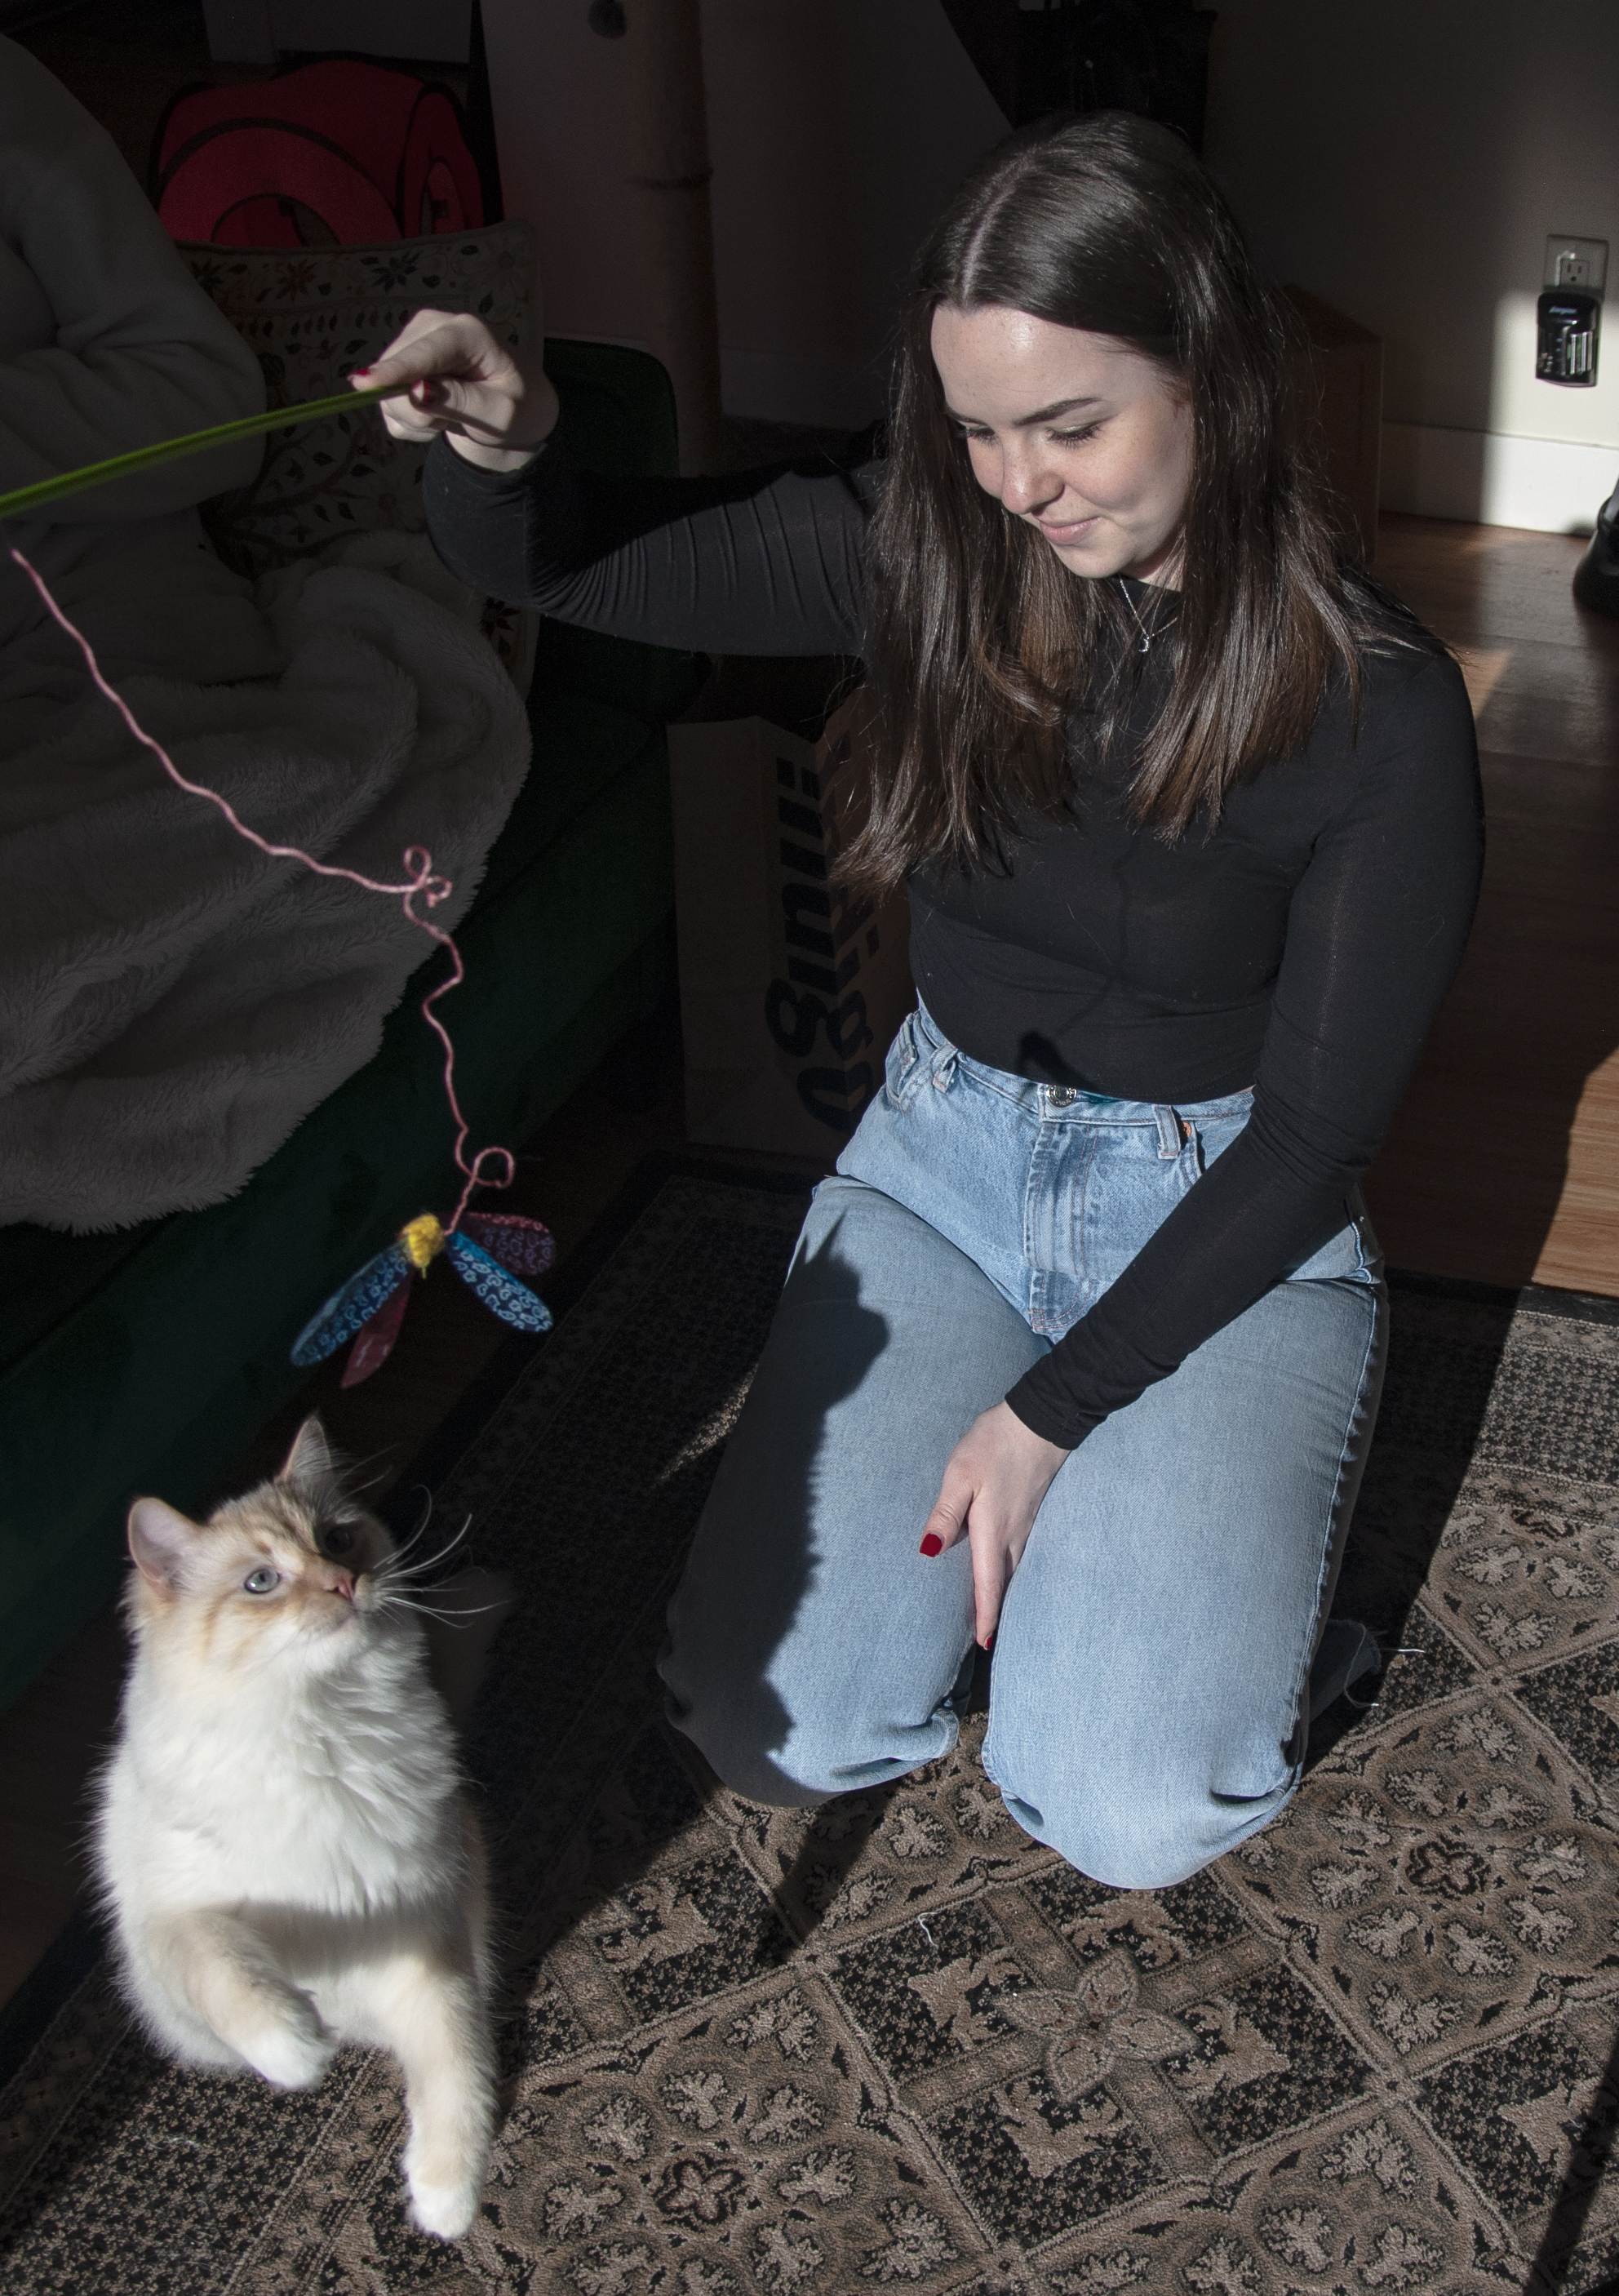 Girl playing with her cat